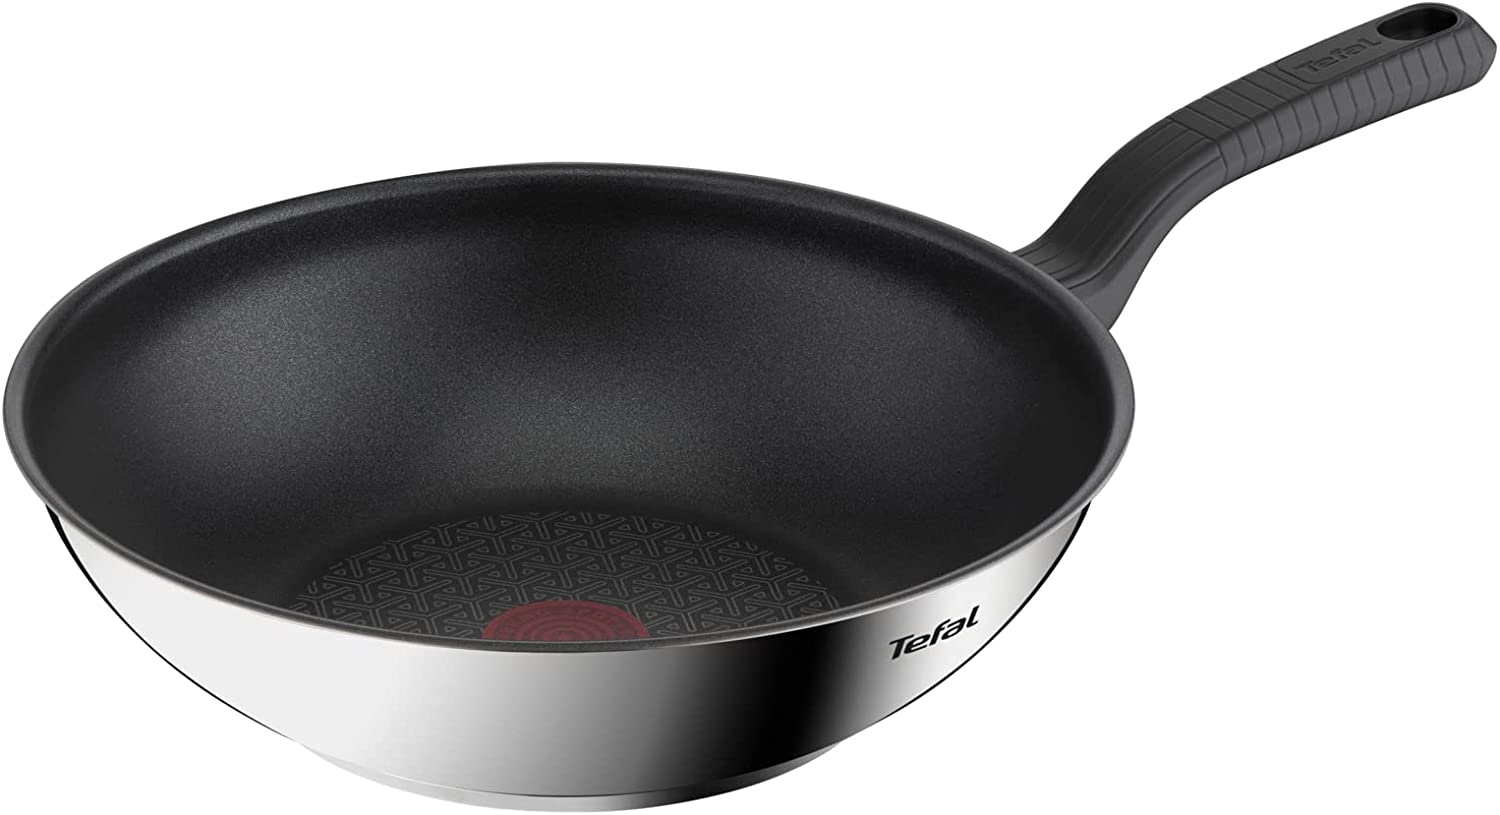 Tefal Comfort Max Stainless Steel Non-stick Wok, 28 cm - Silver